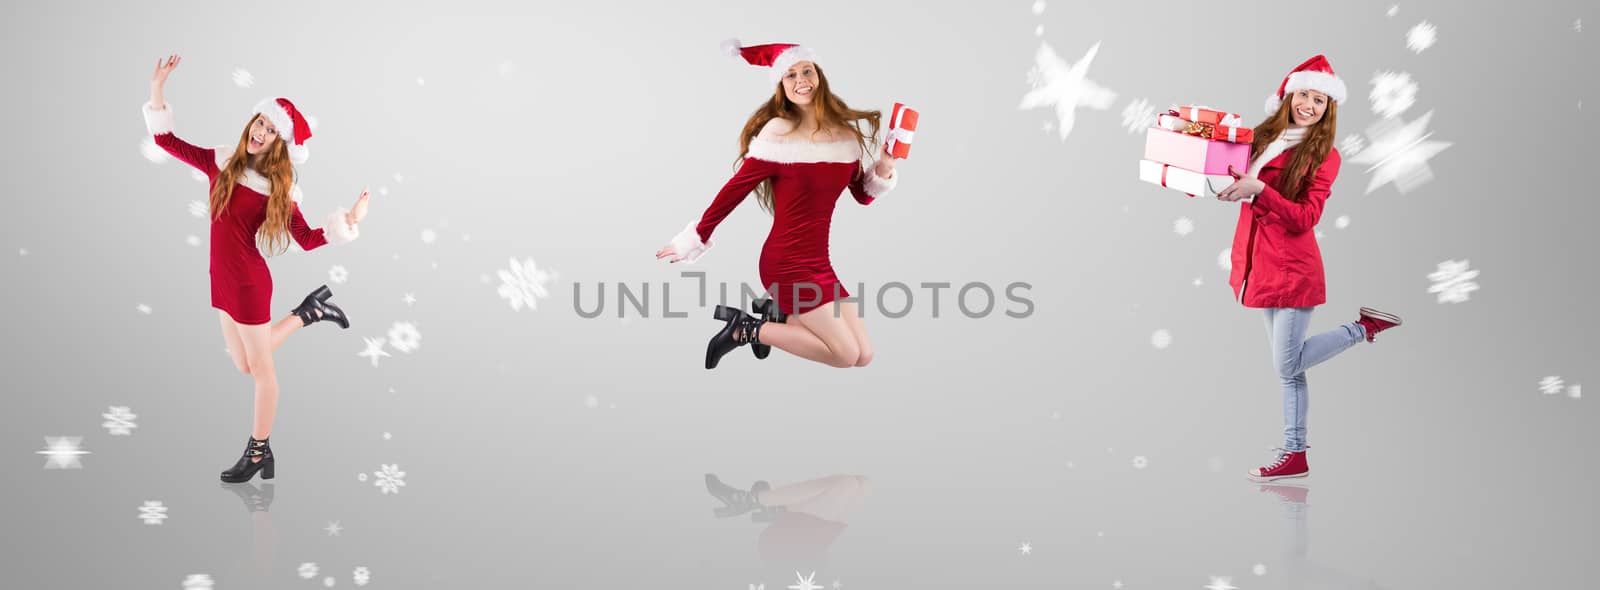 Composite image of festive redhead smiling at camera by Wavebreakmedia